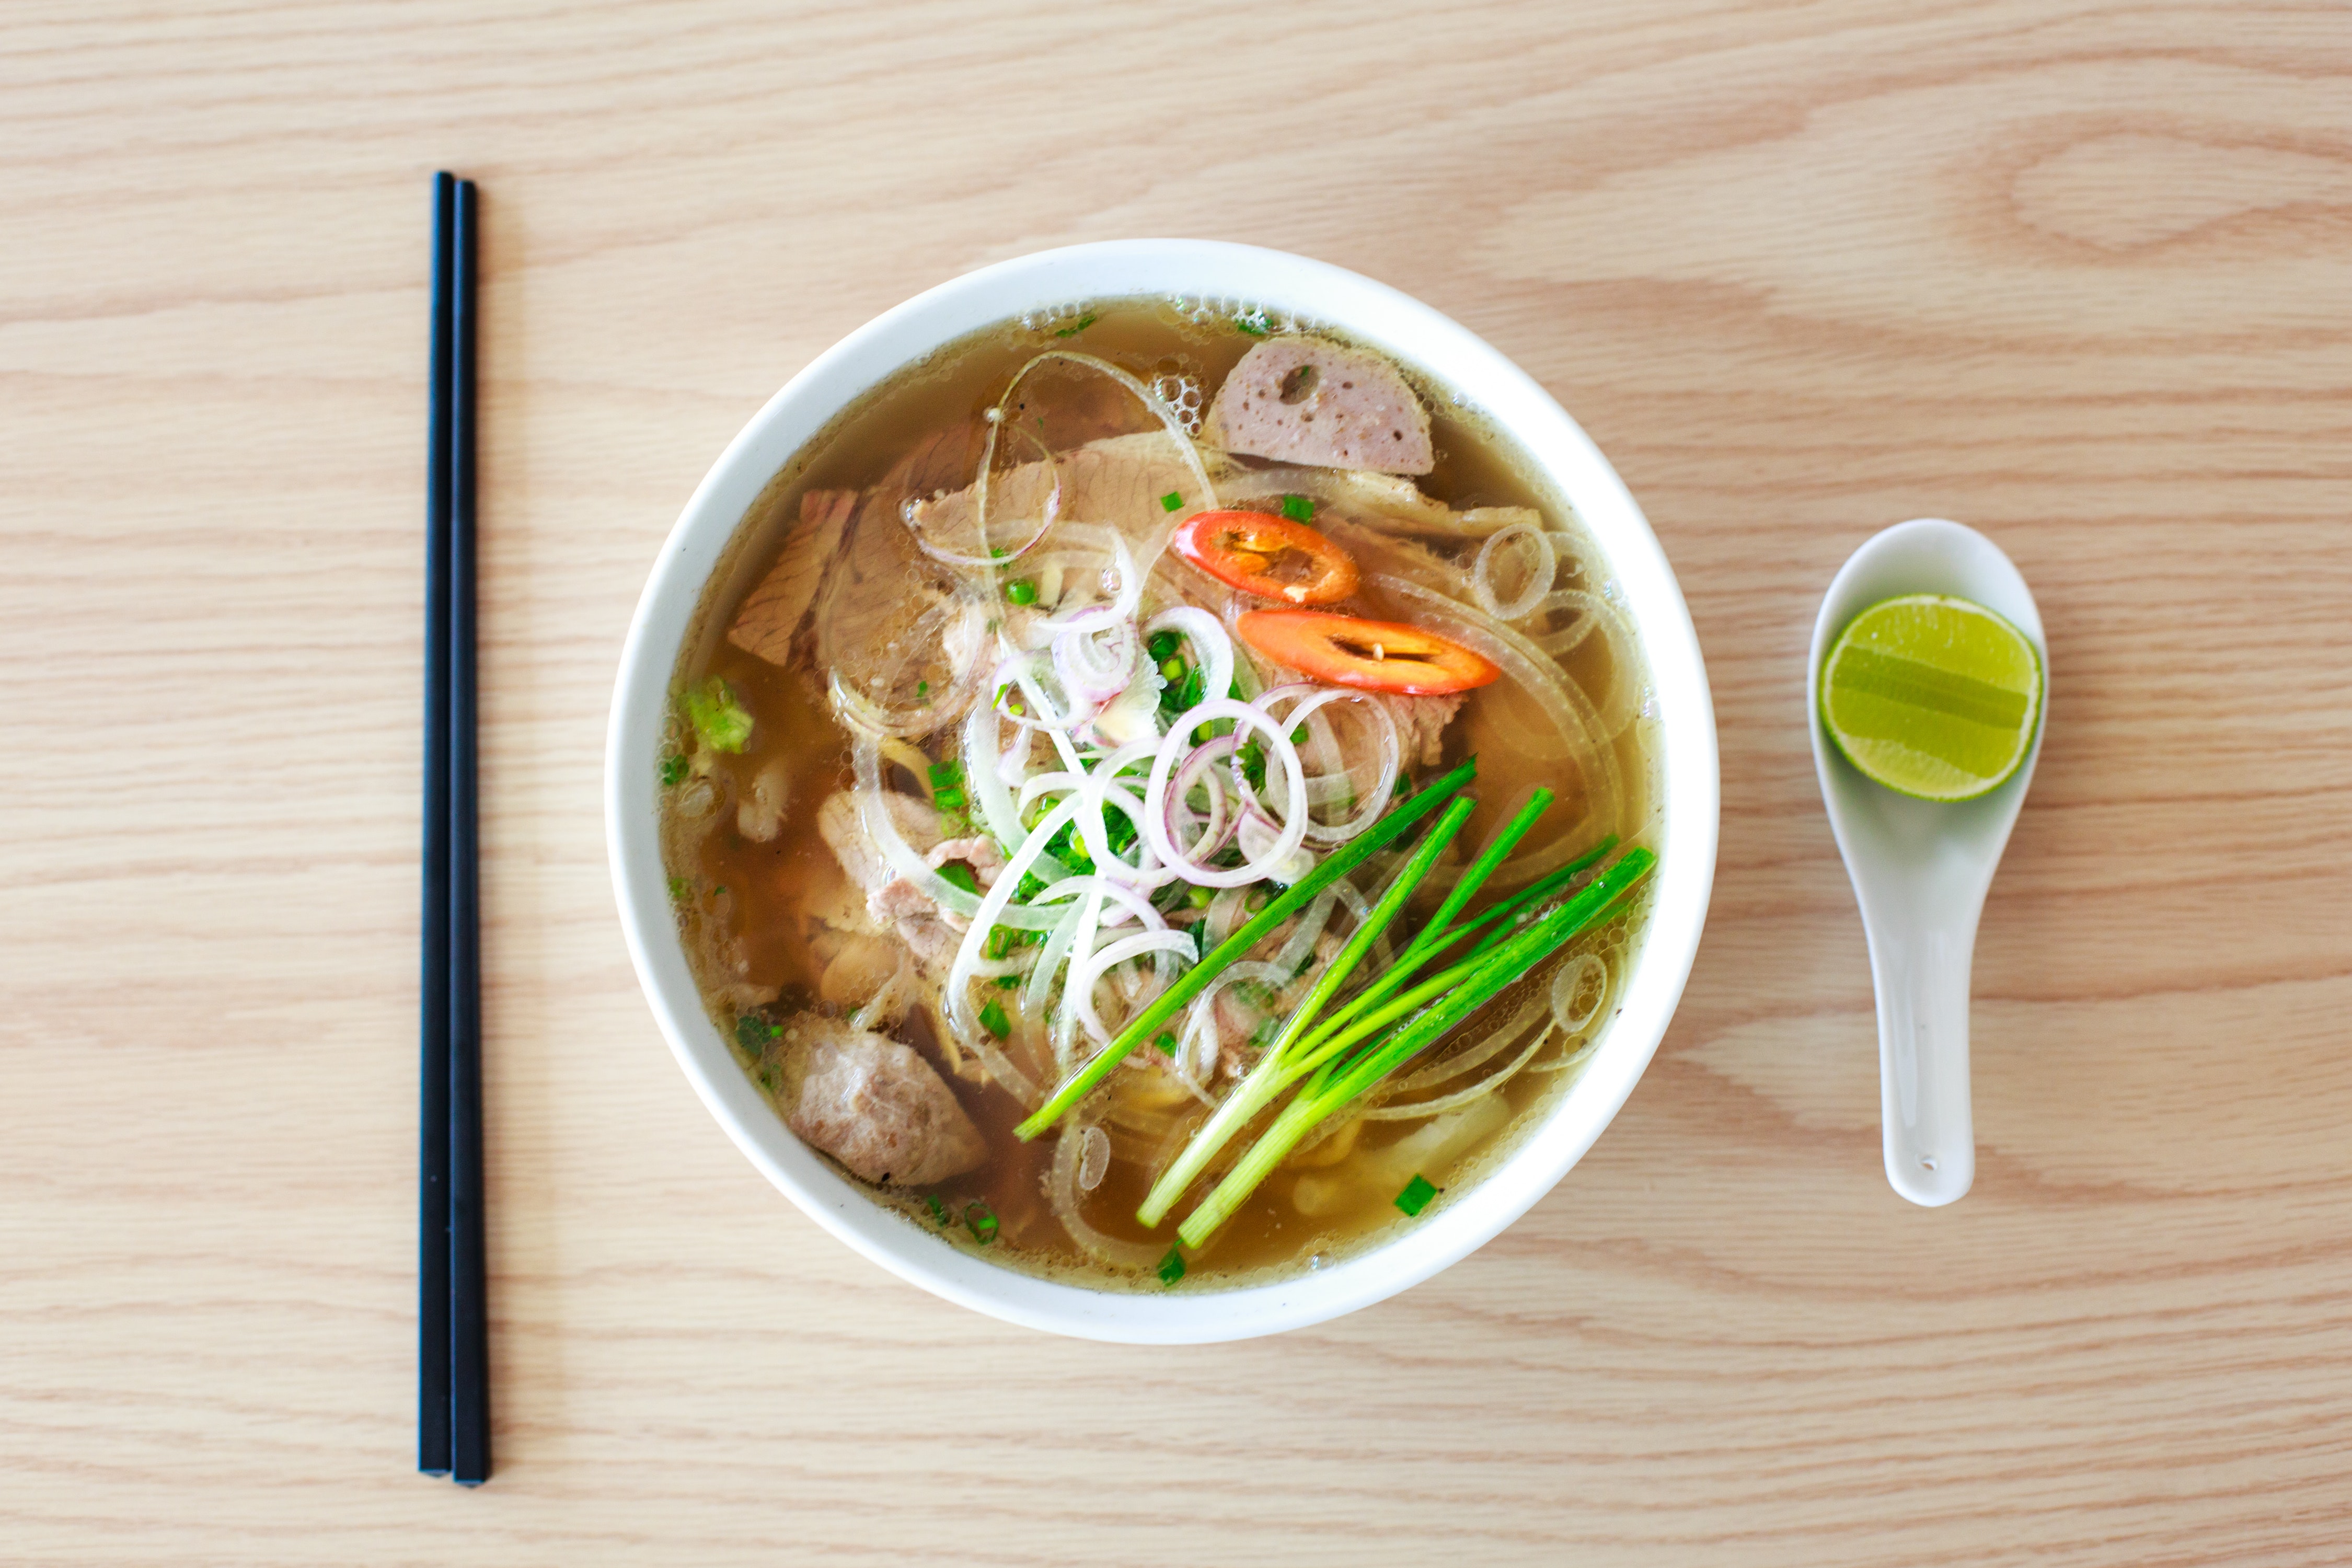 1574733686food-photography-of-ramen-noodle-2133989.jpg?size=1772894